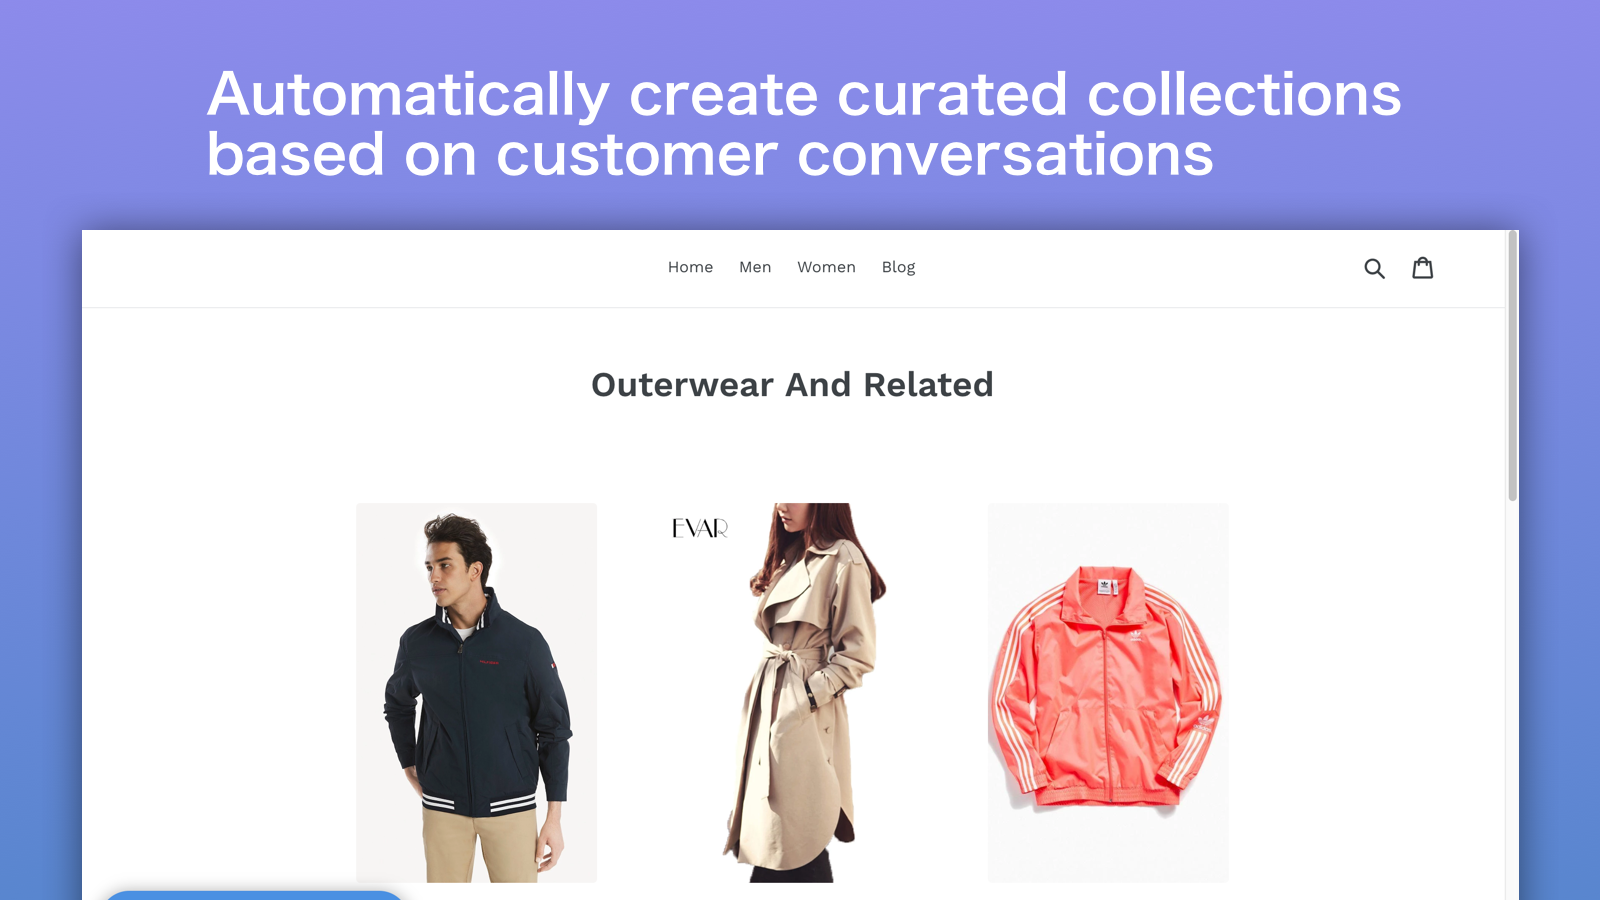 Automatically create collections based on customer conversation